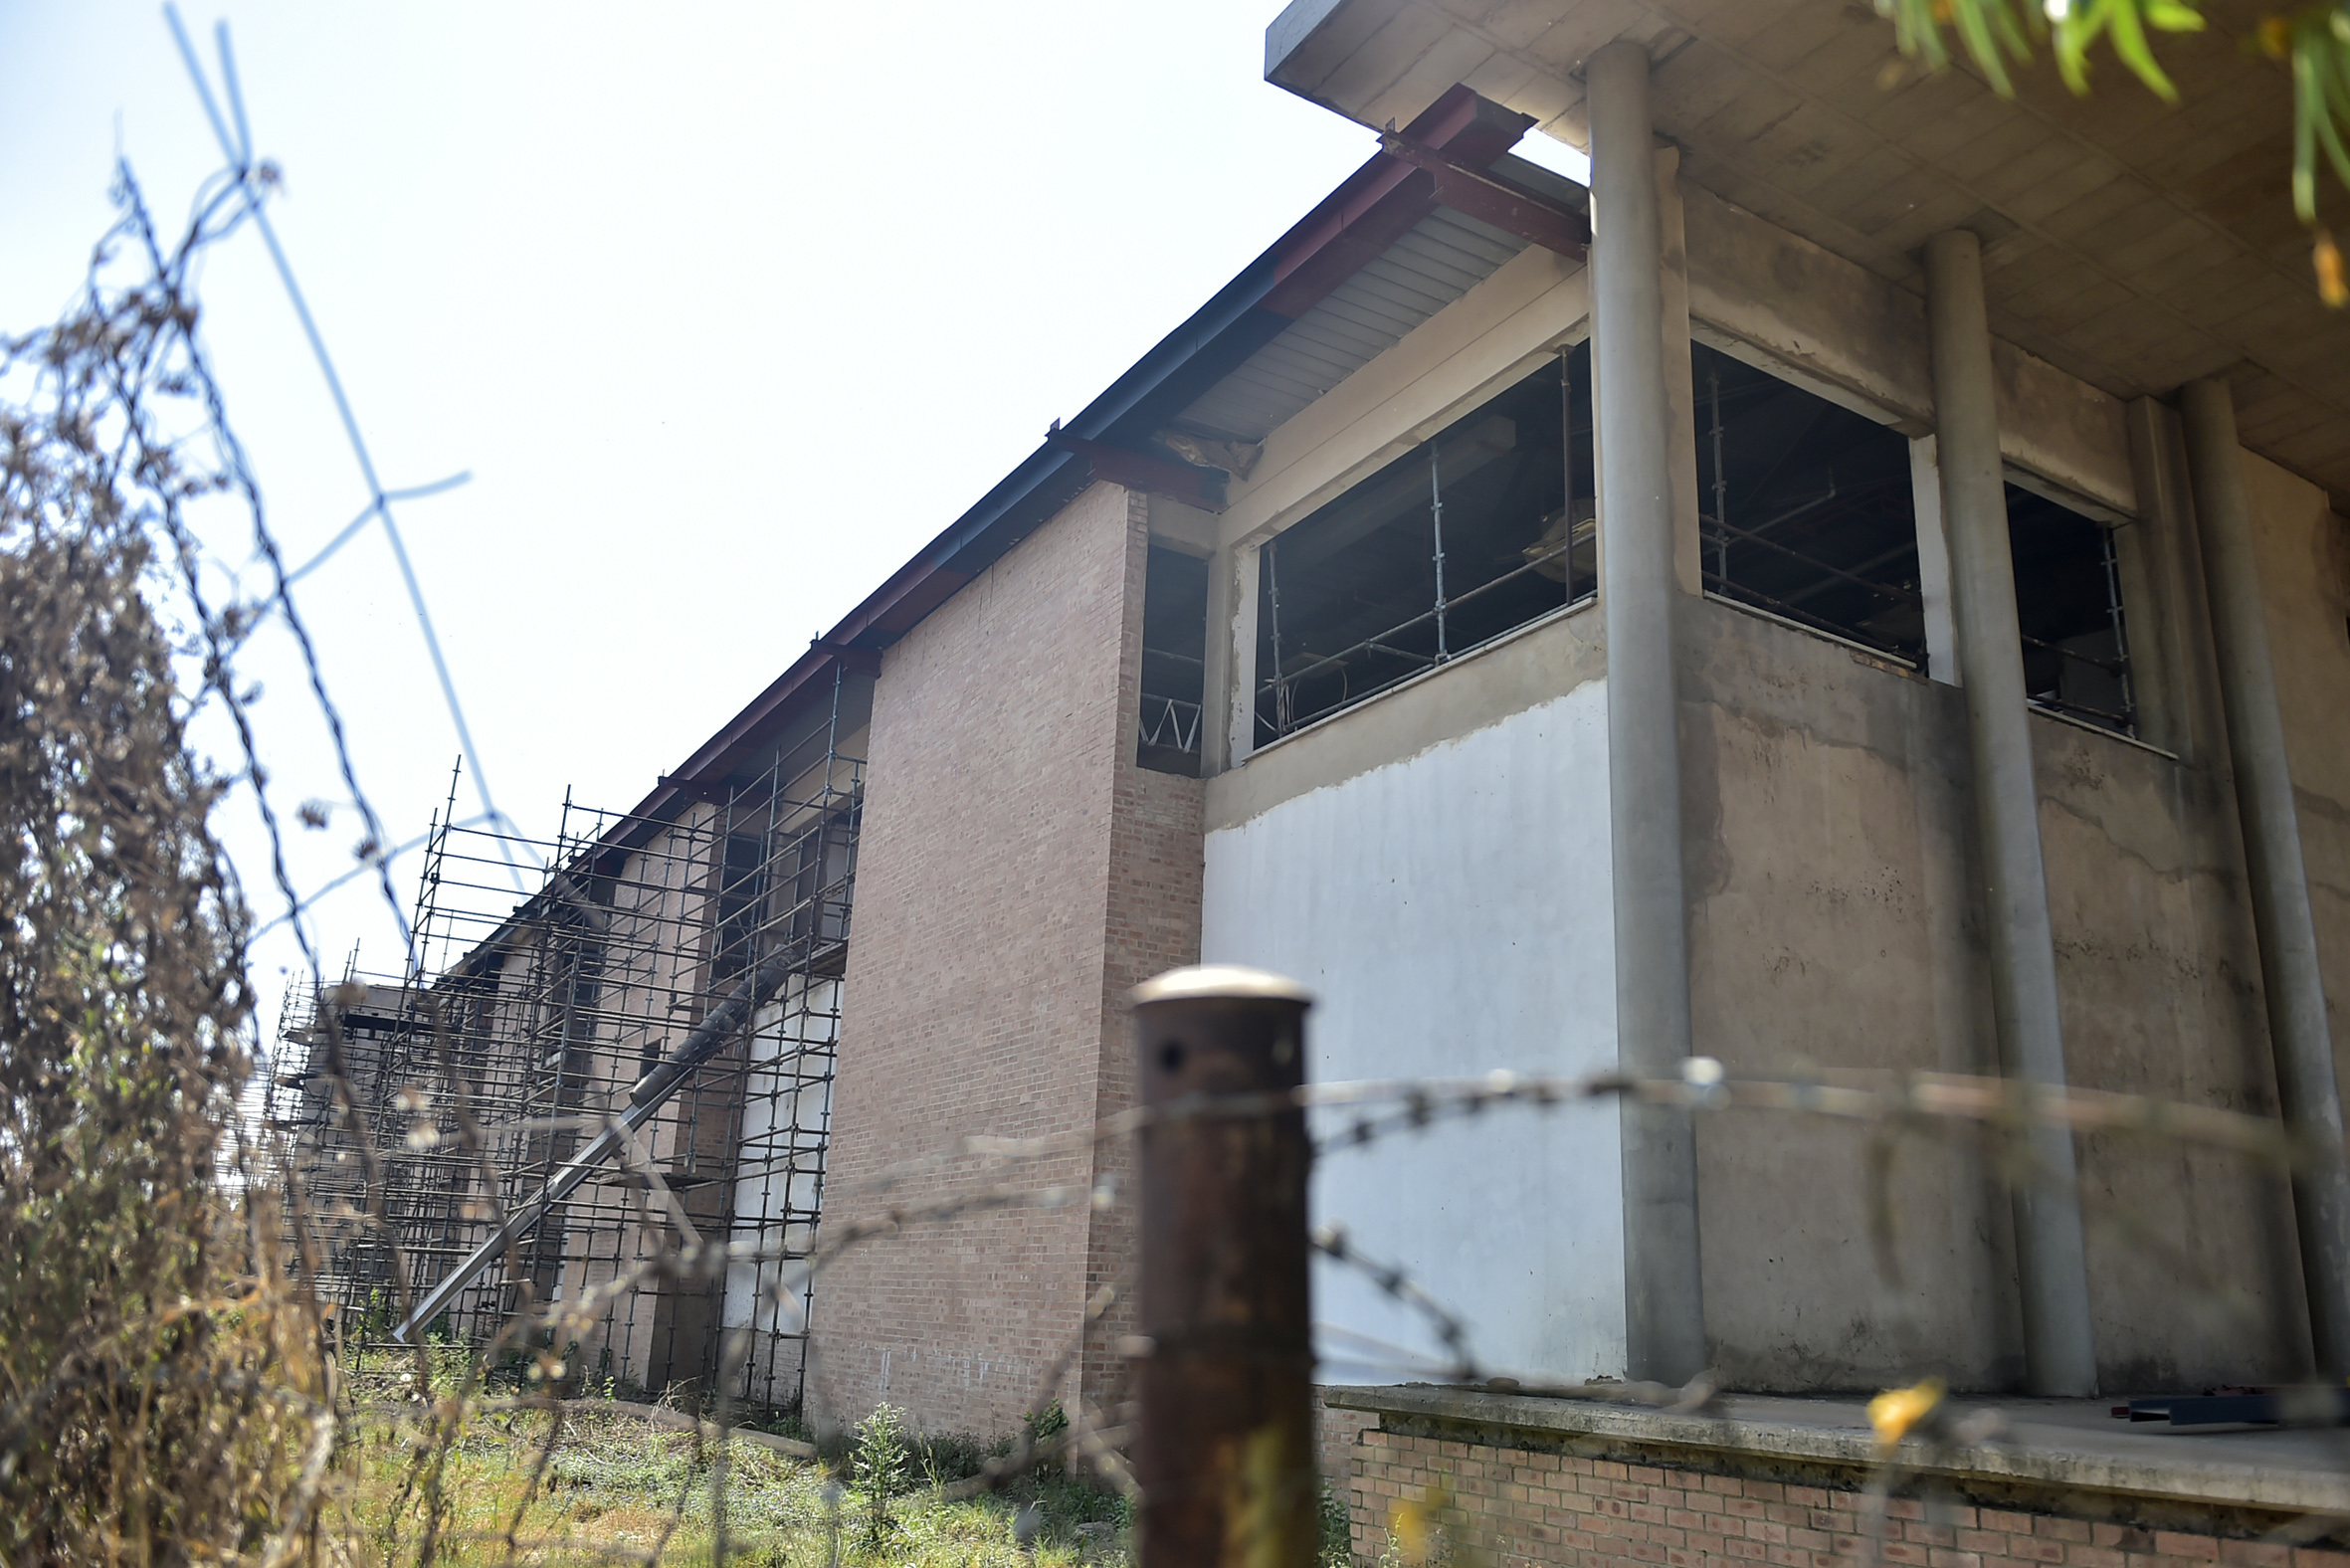 A view of the incomplete Mamelodi Magistrates' Court building